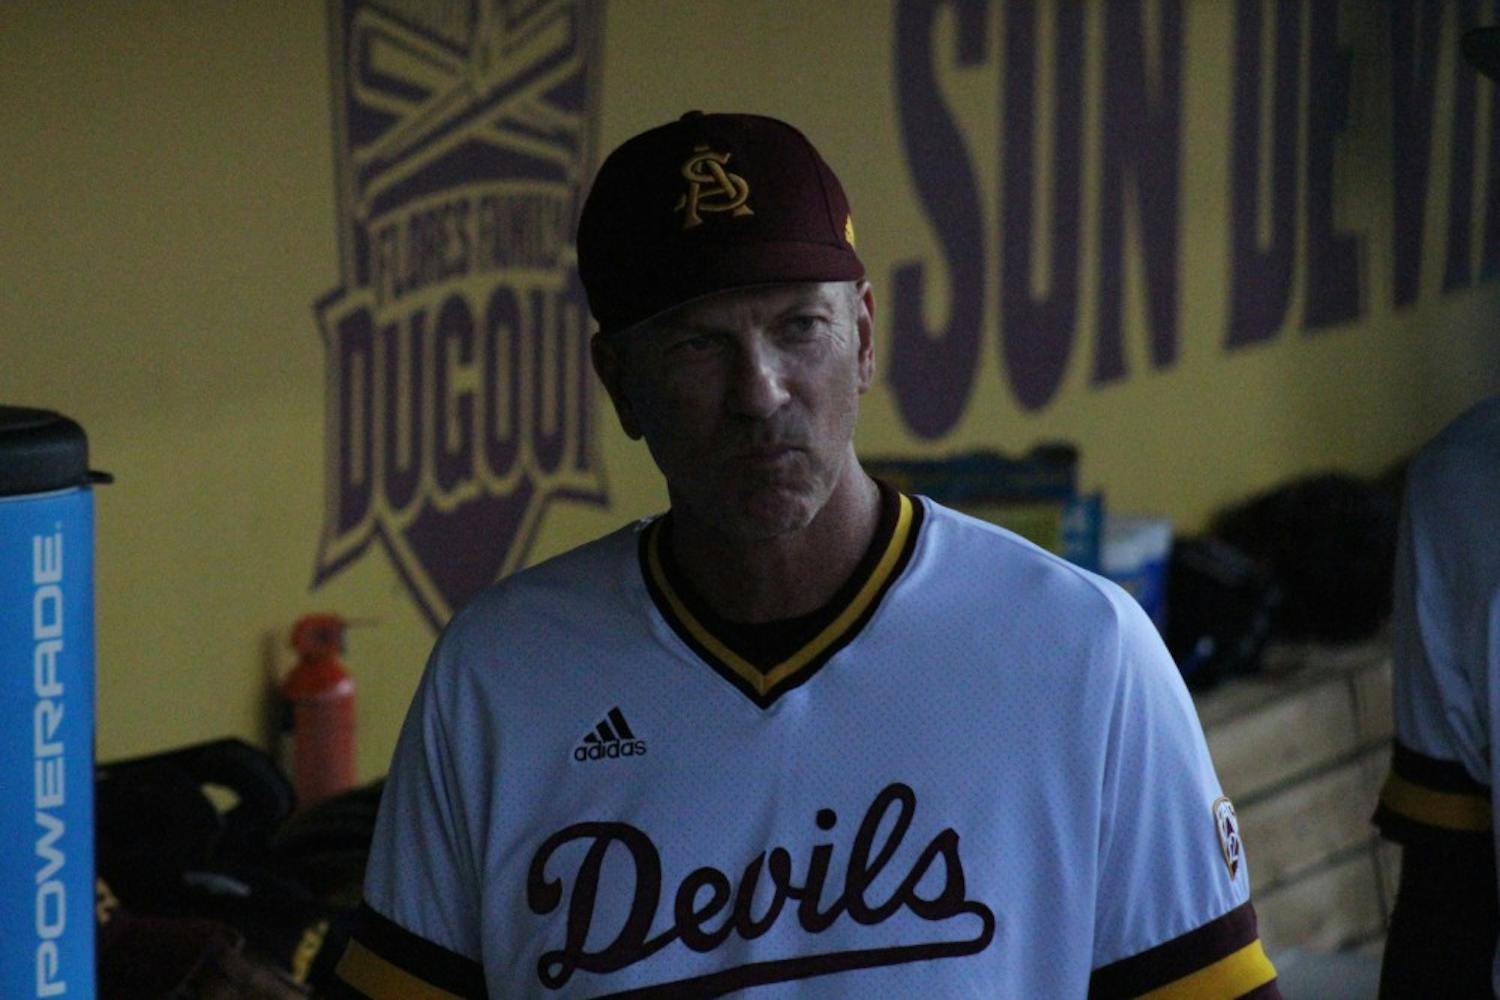 Head Coach Tracy Smith walks in the dugout during a baseball game against the Arizona Wildcats&nbsp;at Phoenix Municipal Stadium in Phoenix, Arizona on Saturday, May 20, 2017. ASU lost 5-9